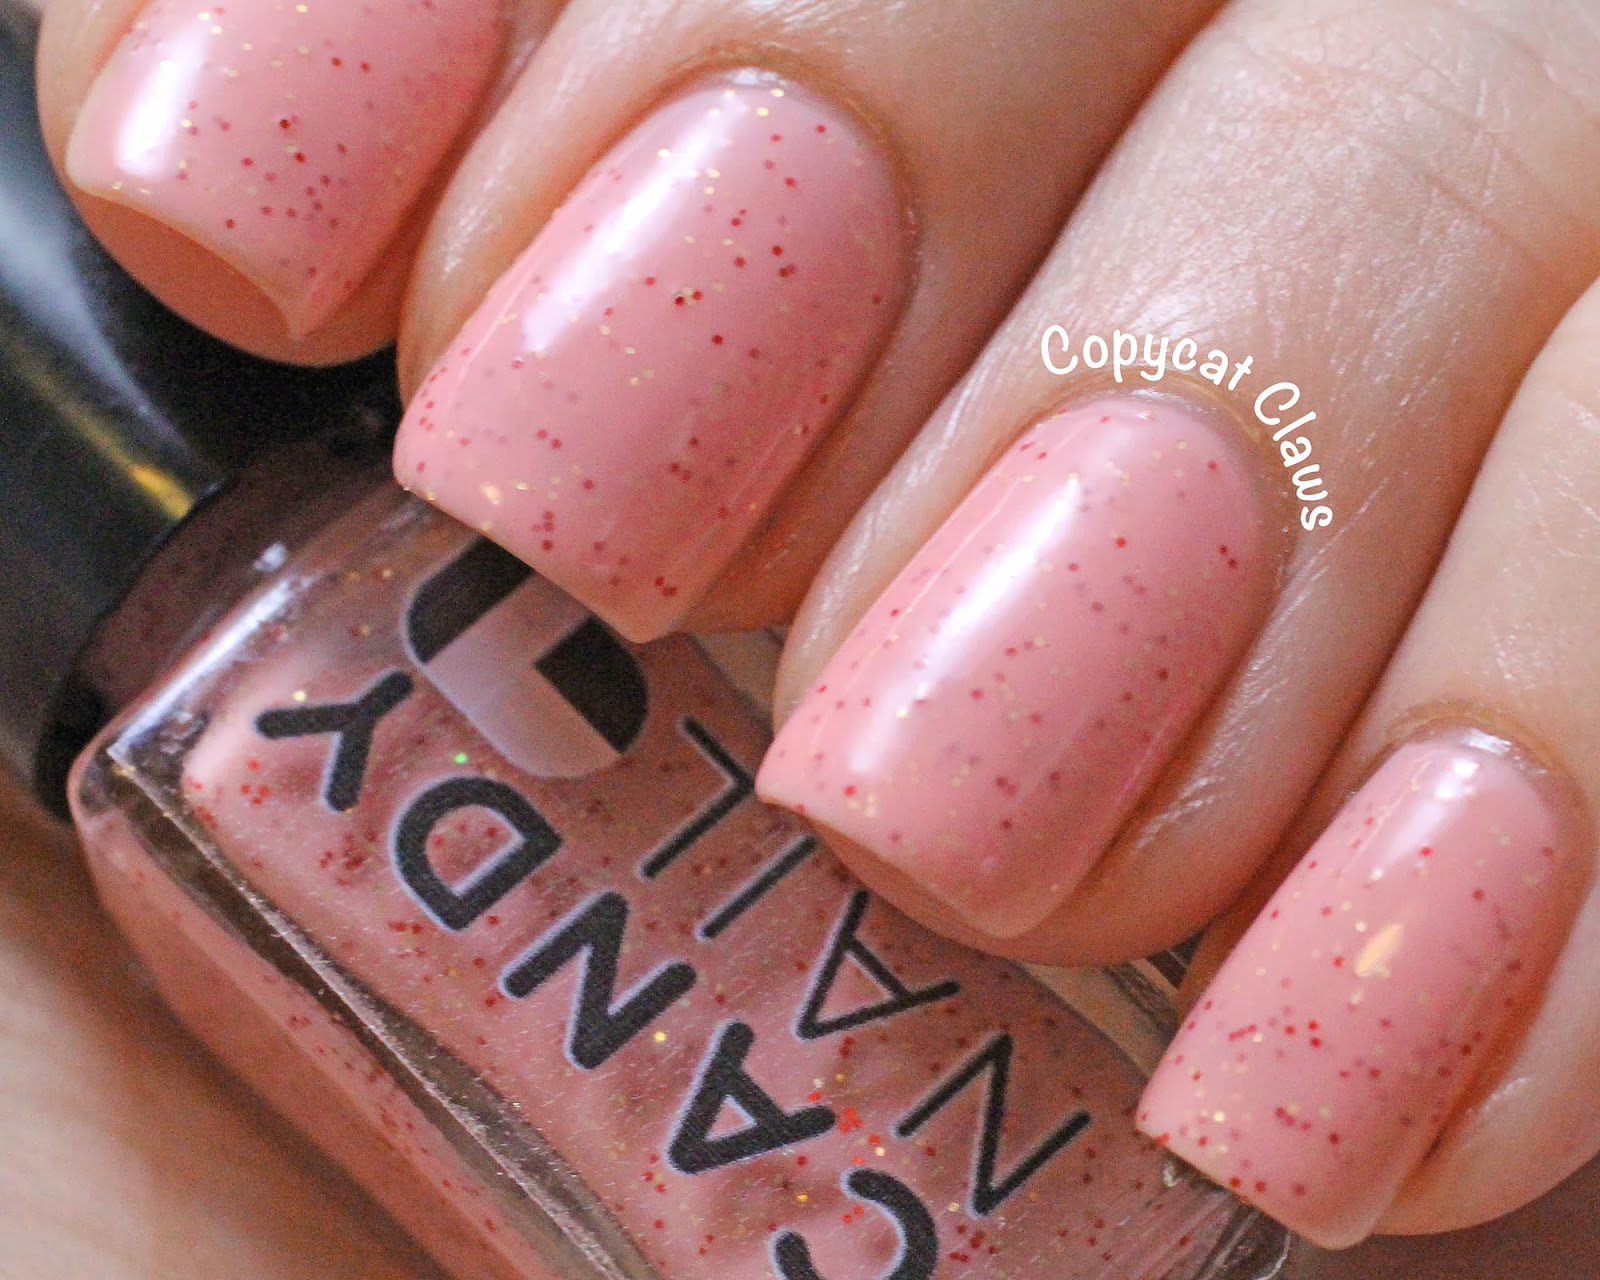 10. Orly Nail Lacquer in "Strawberry Smoothie" - wide 7